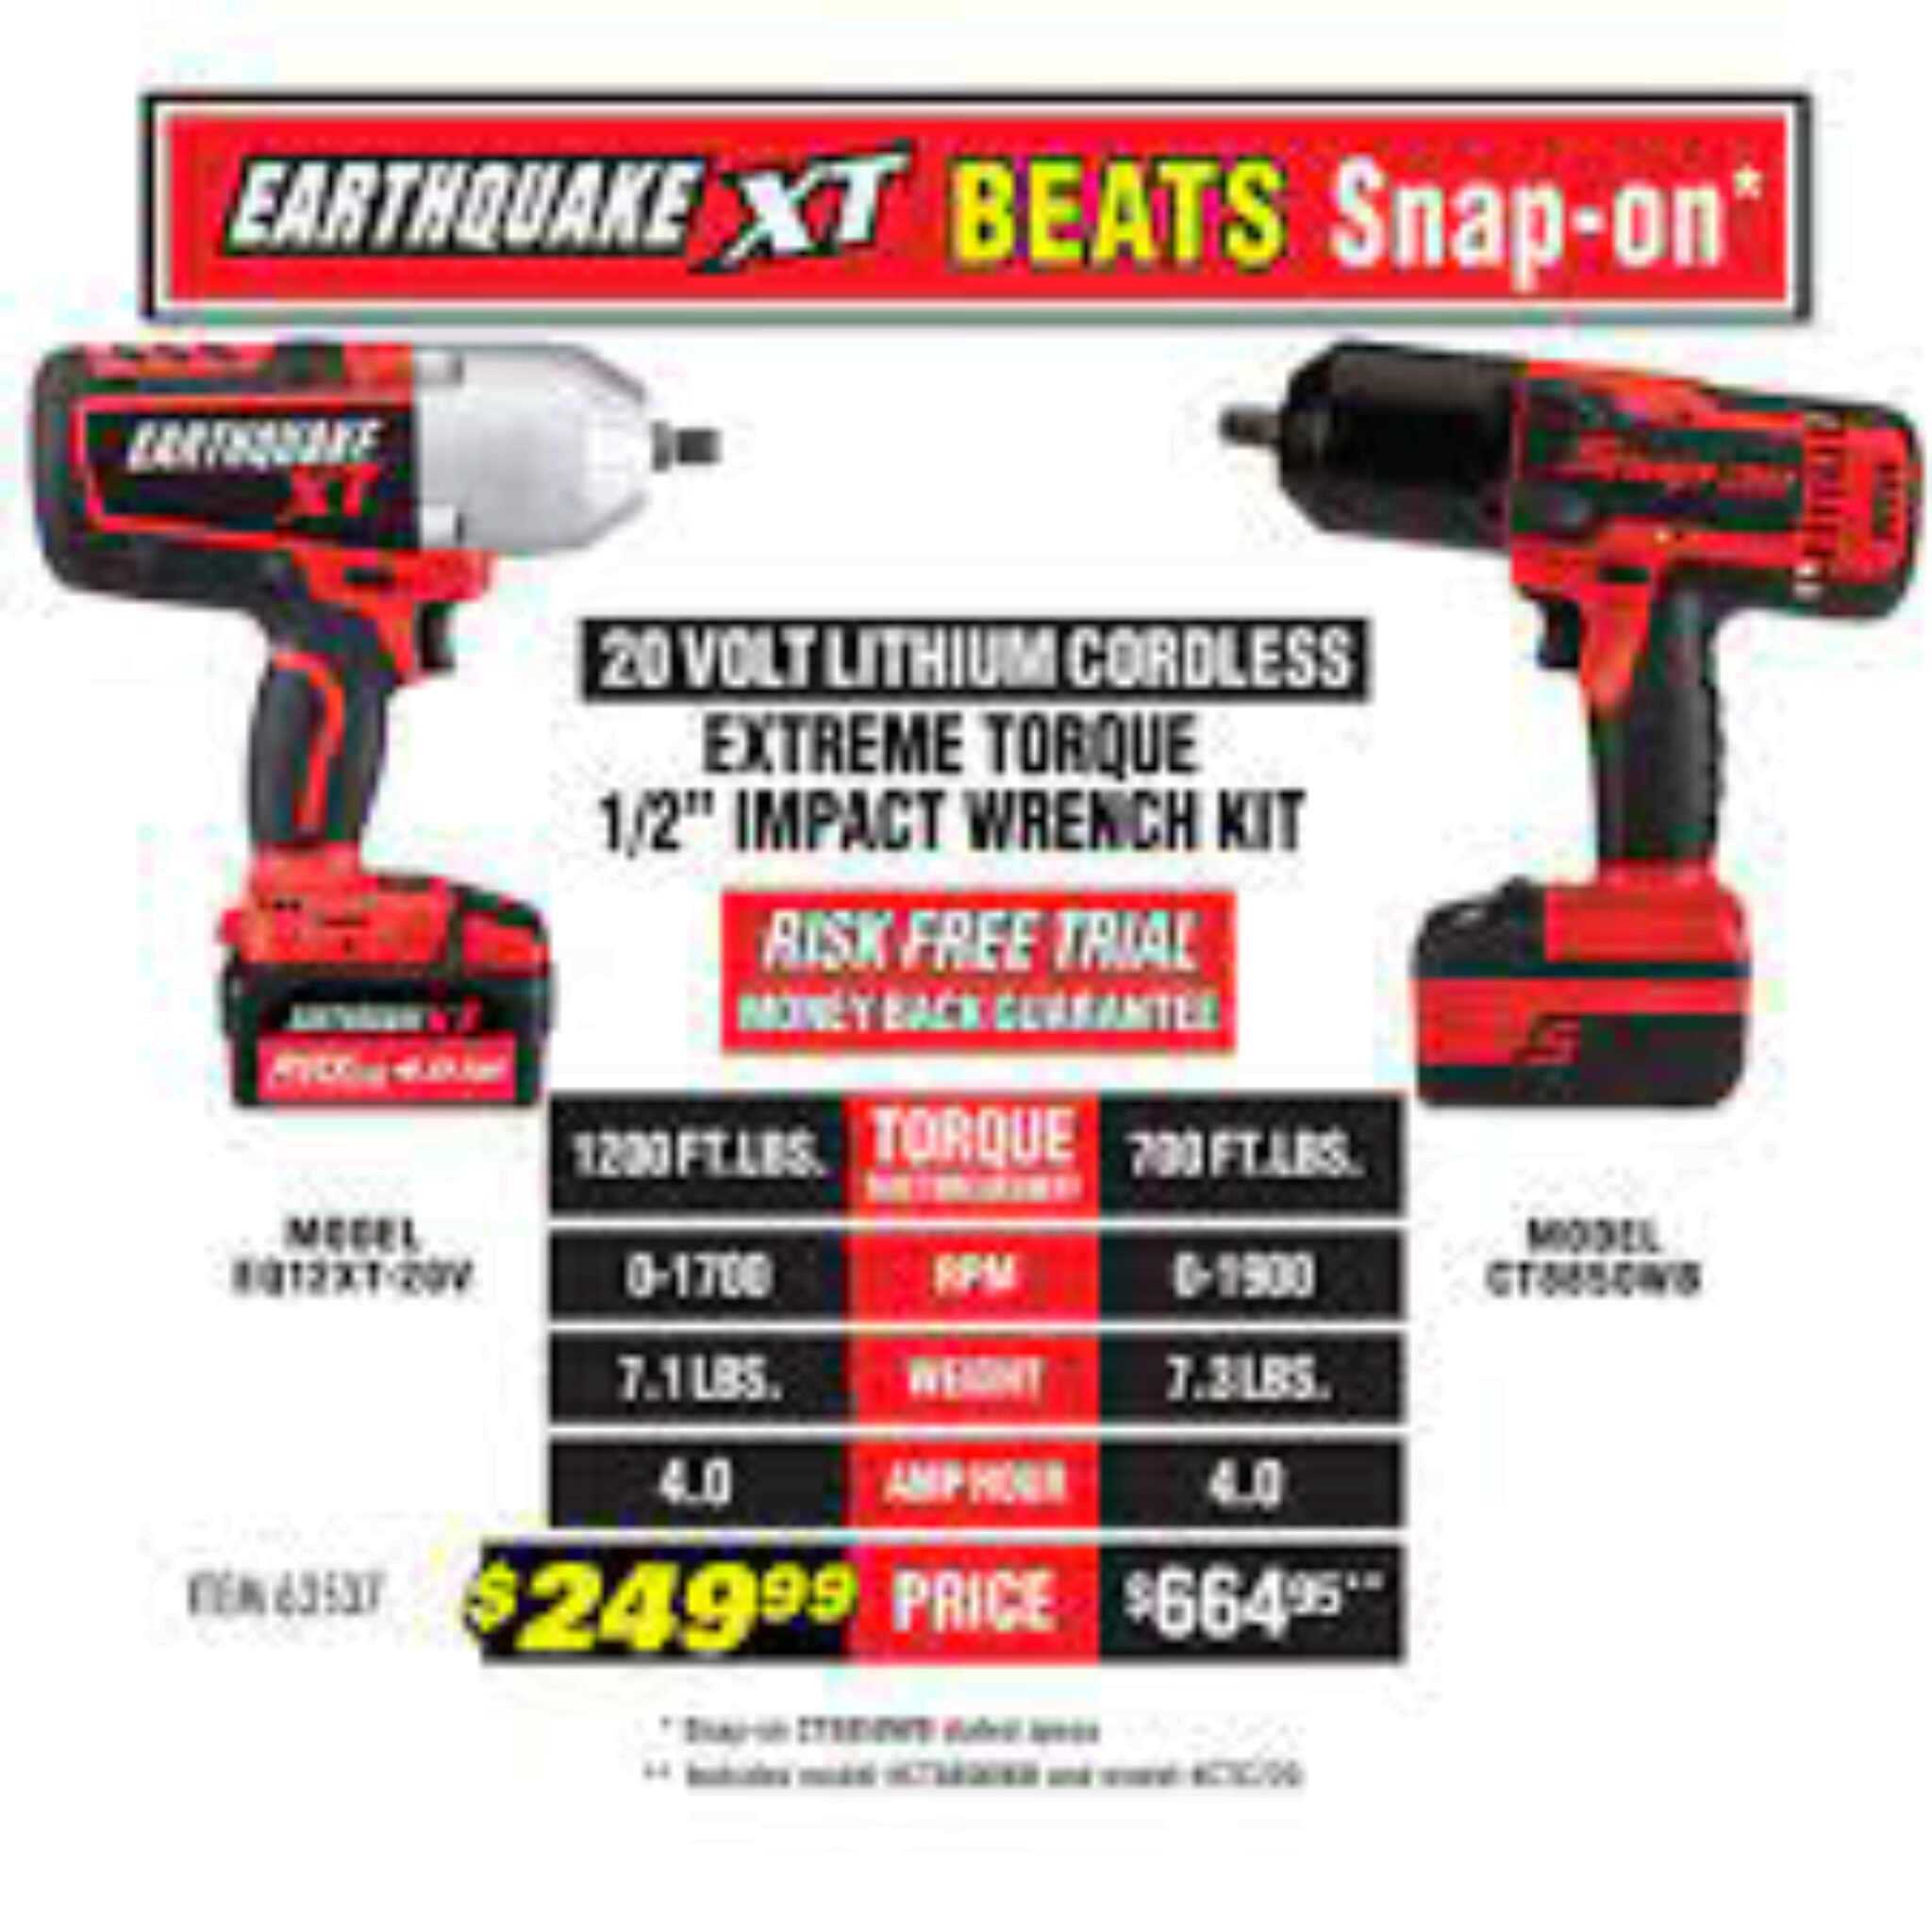 New Harbor Freight Cordless Tool - Lithium 20V Extreme Torque Impact Wrenches